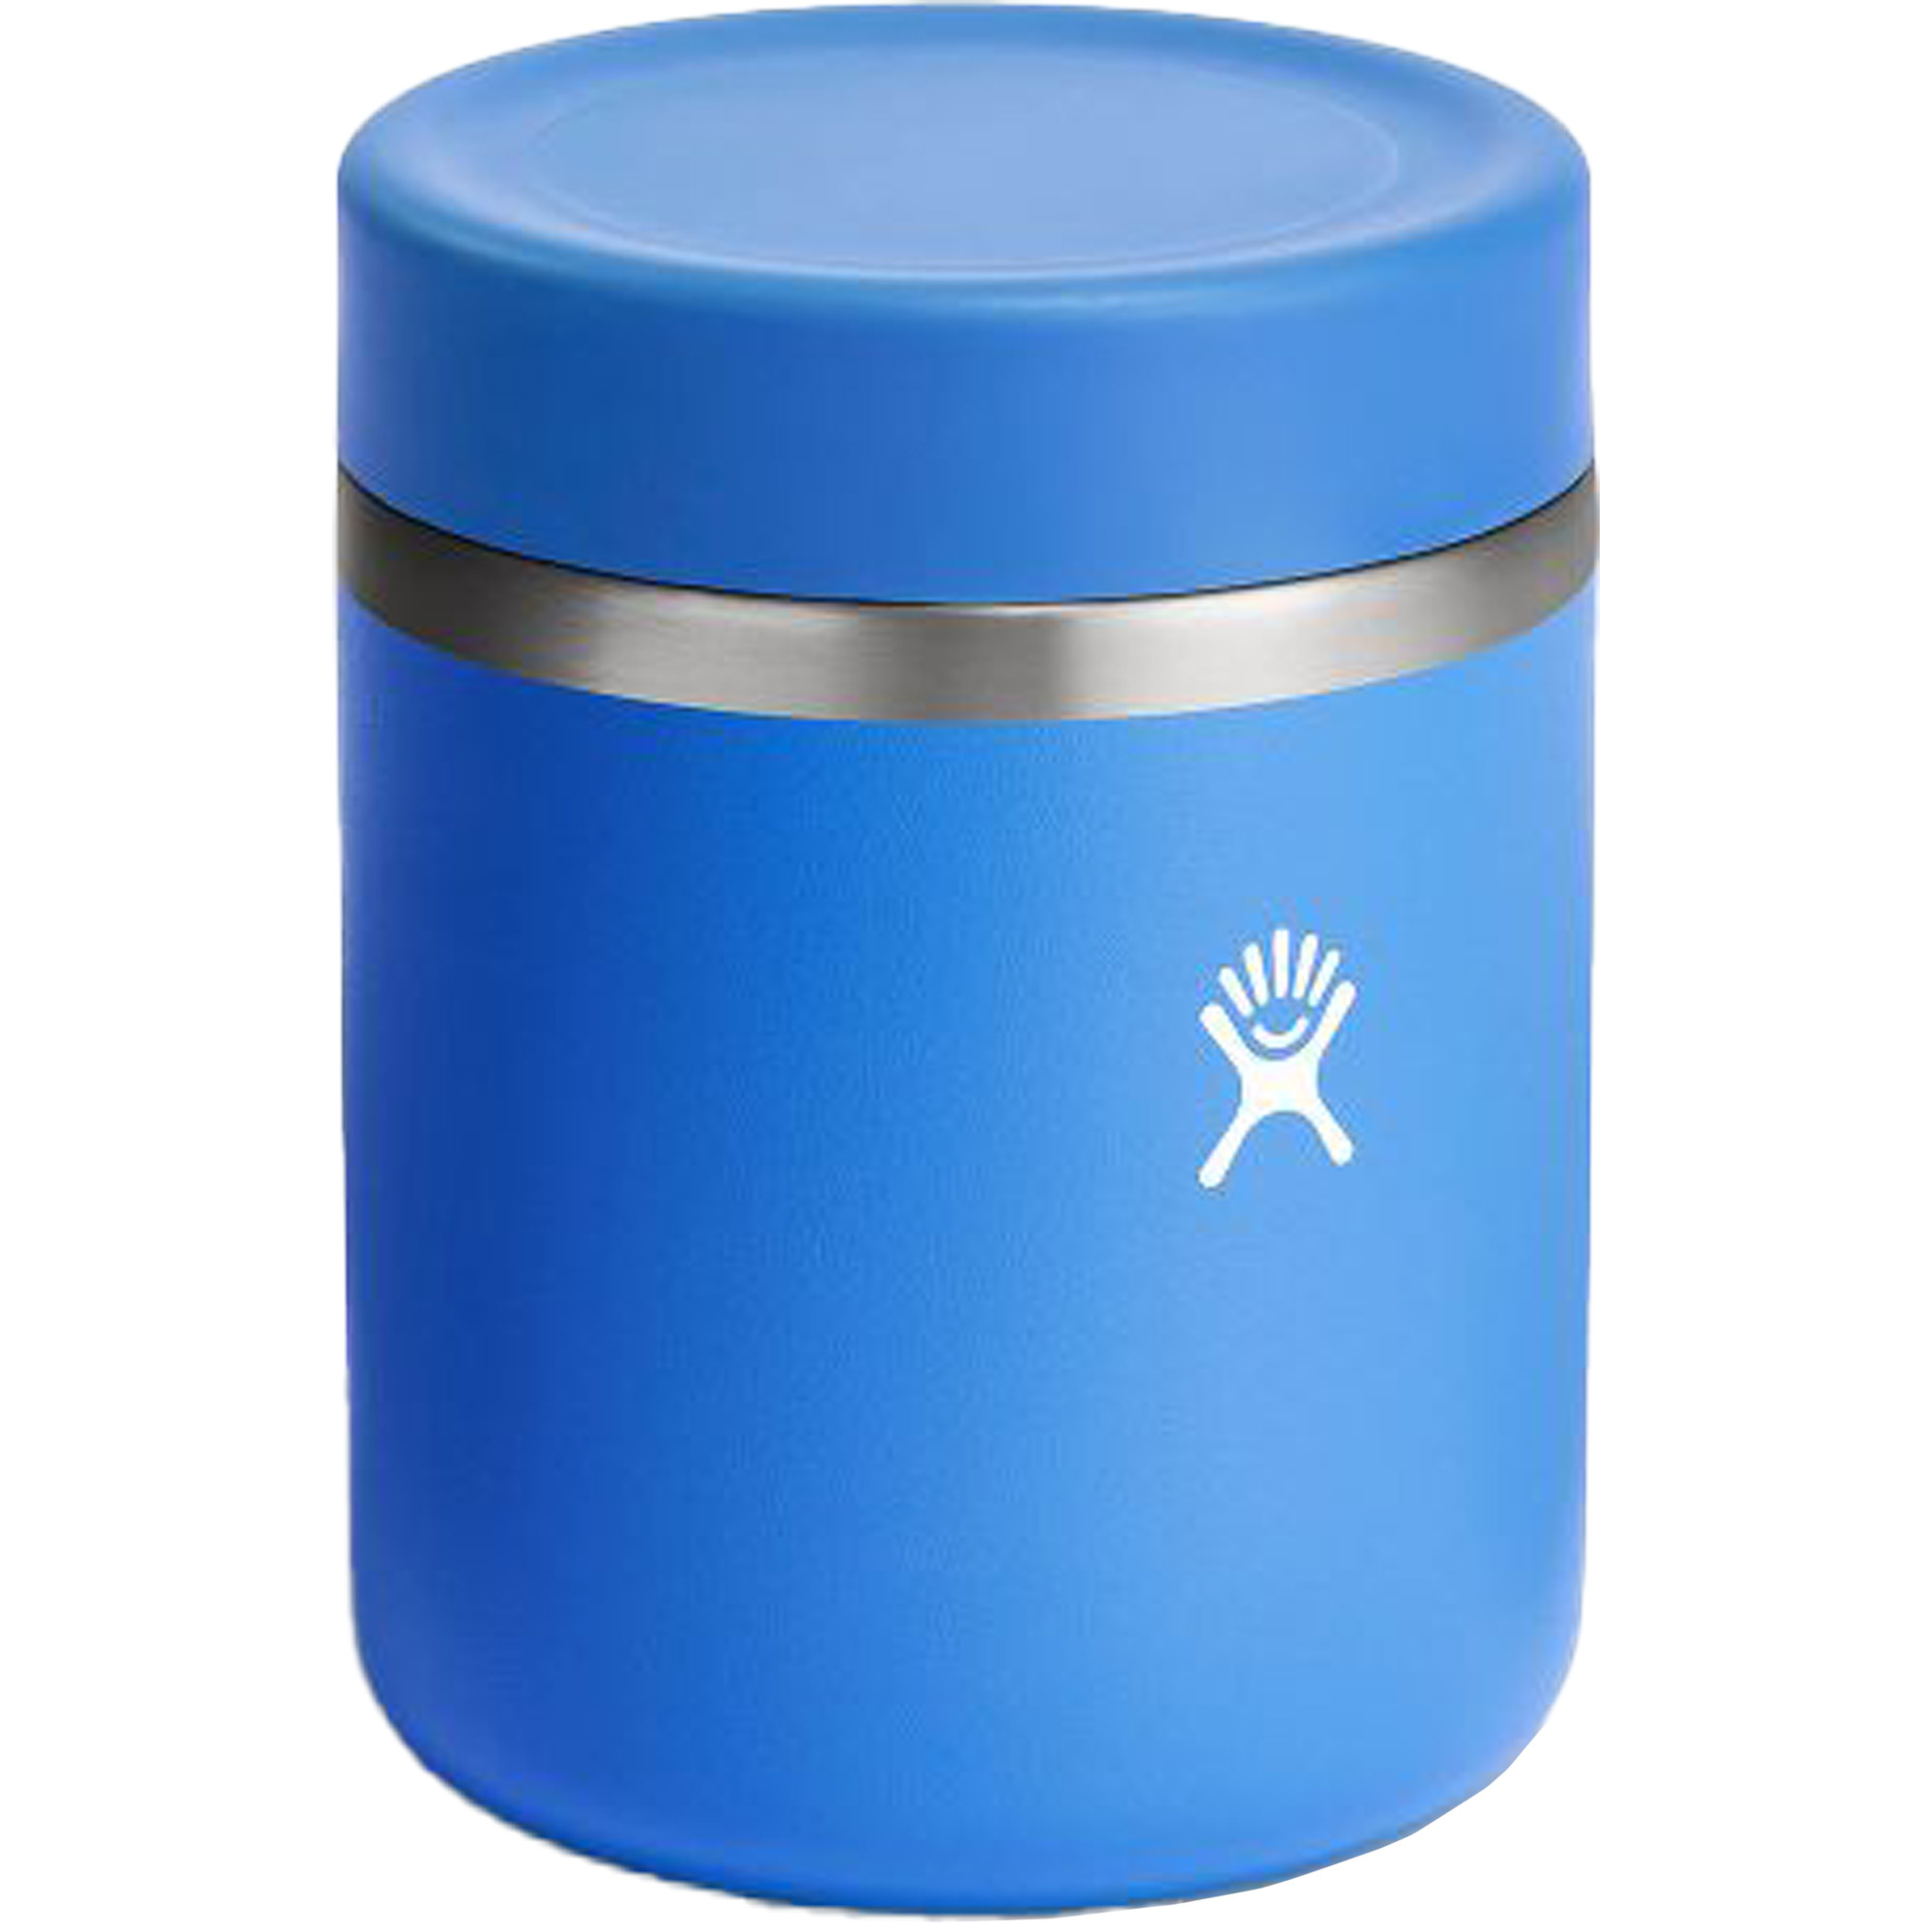 Hydro Flask Insulated Food Jar 28 oz Meal Container